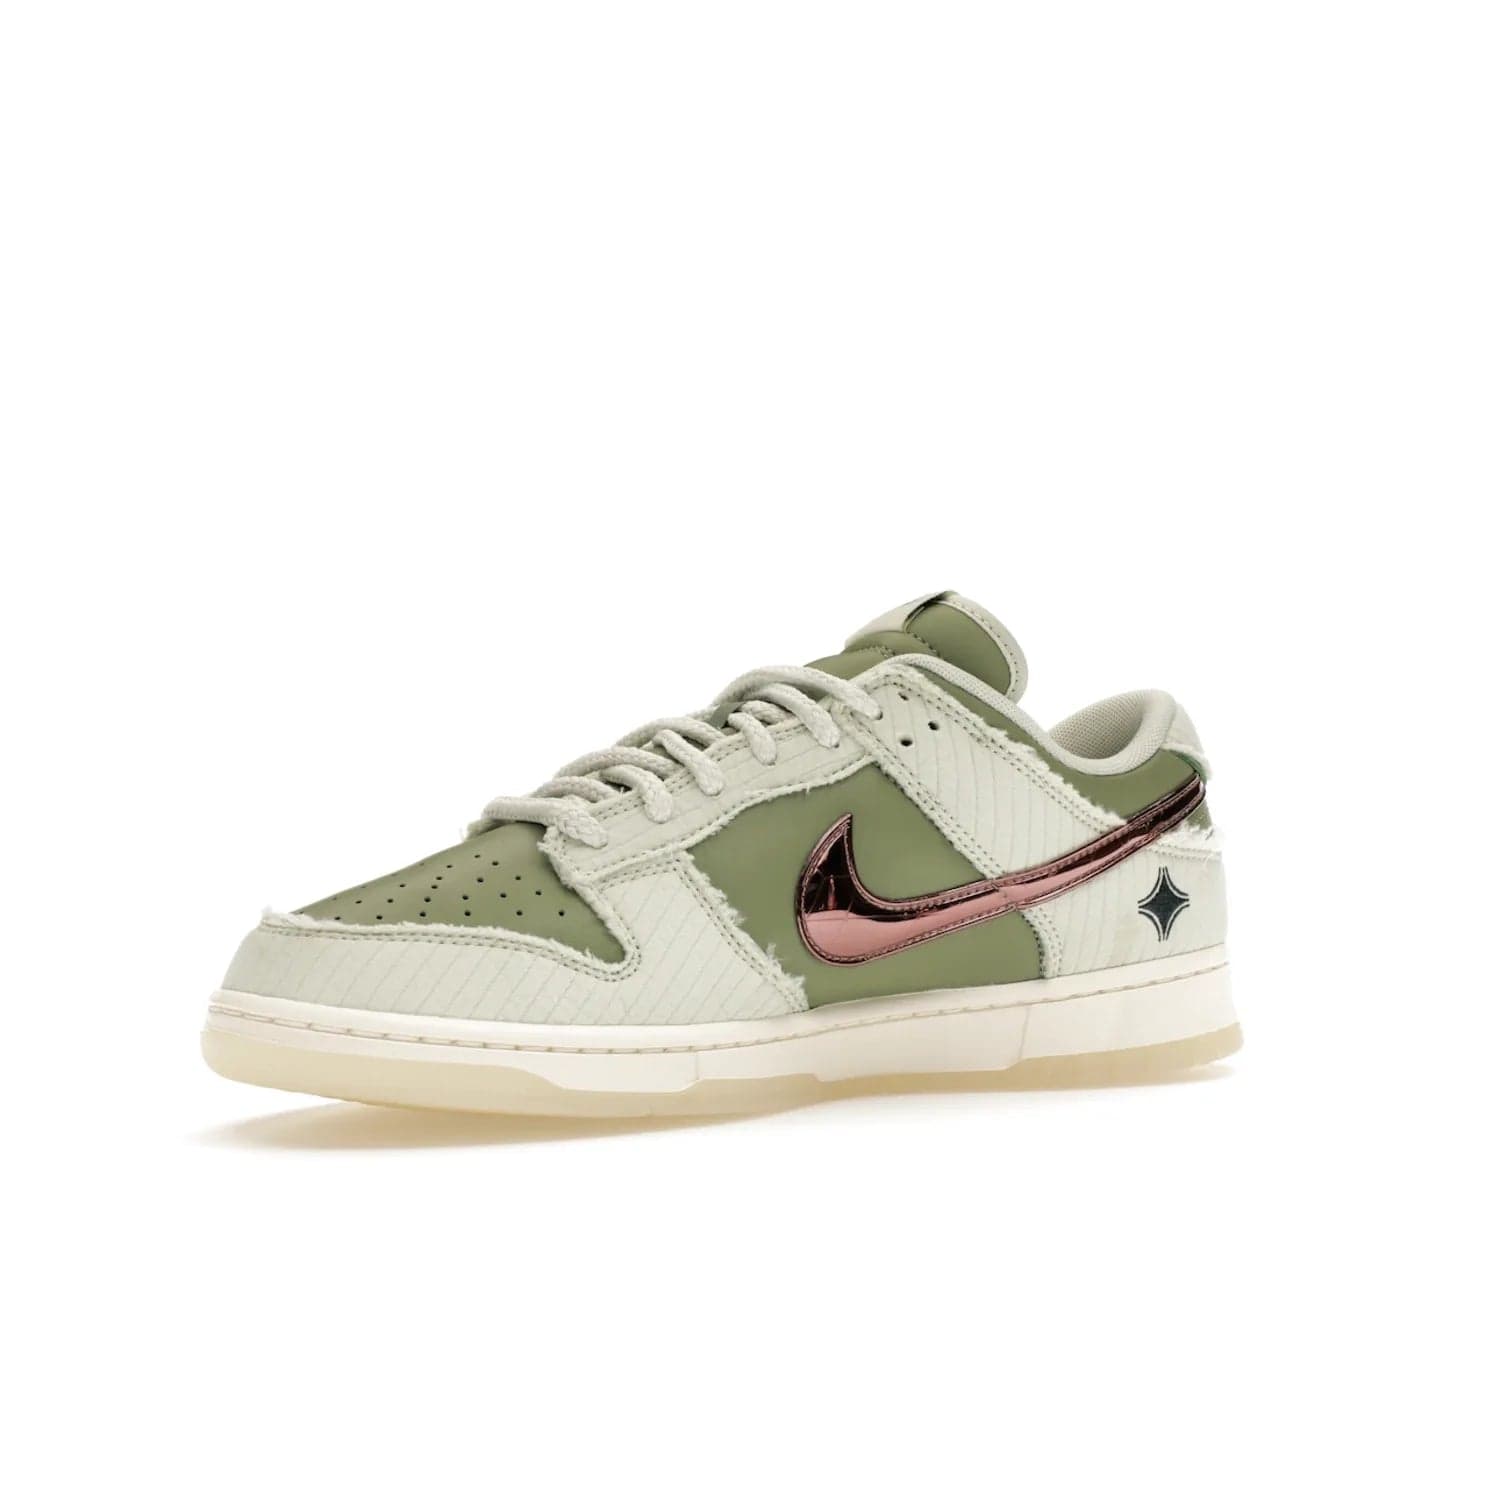 Nike Dunk Low Retro PRM Kyler Murray Be 1 of One - Image 16 - Only at www.BallersClubKickz.com - Introducing the Nike Dunk Low Retro PRM Kyler Murray "Be 1 of One"! A Sea Glass upper with Sail and Oil Green accents, finished with Rose Gold accents. Drop date: November 10th.